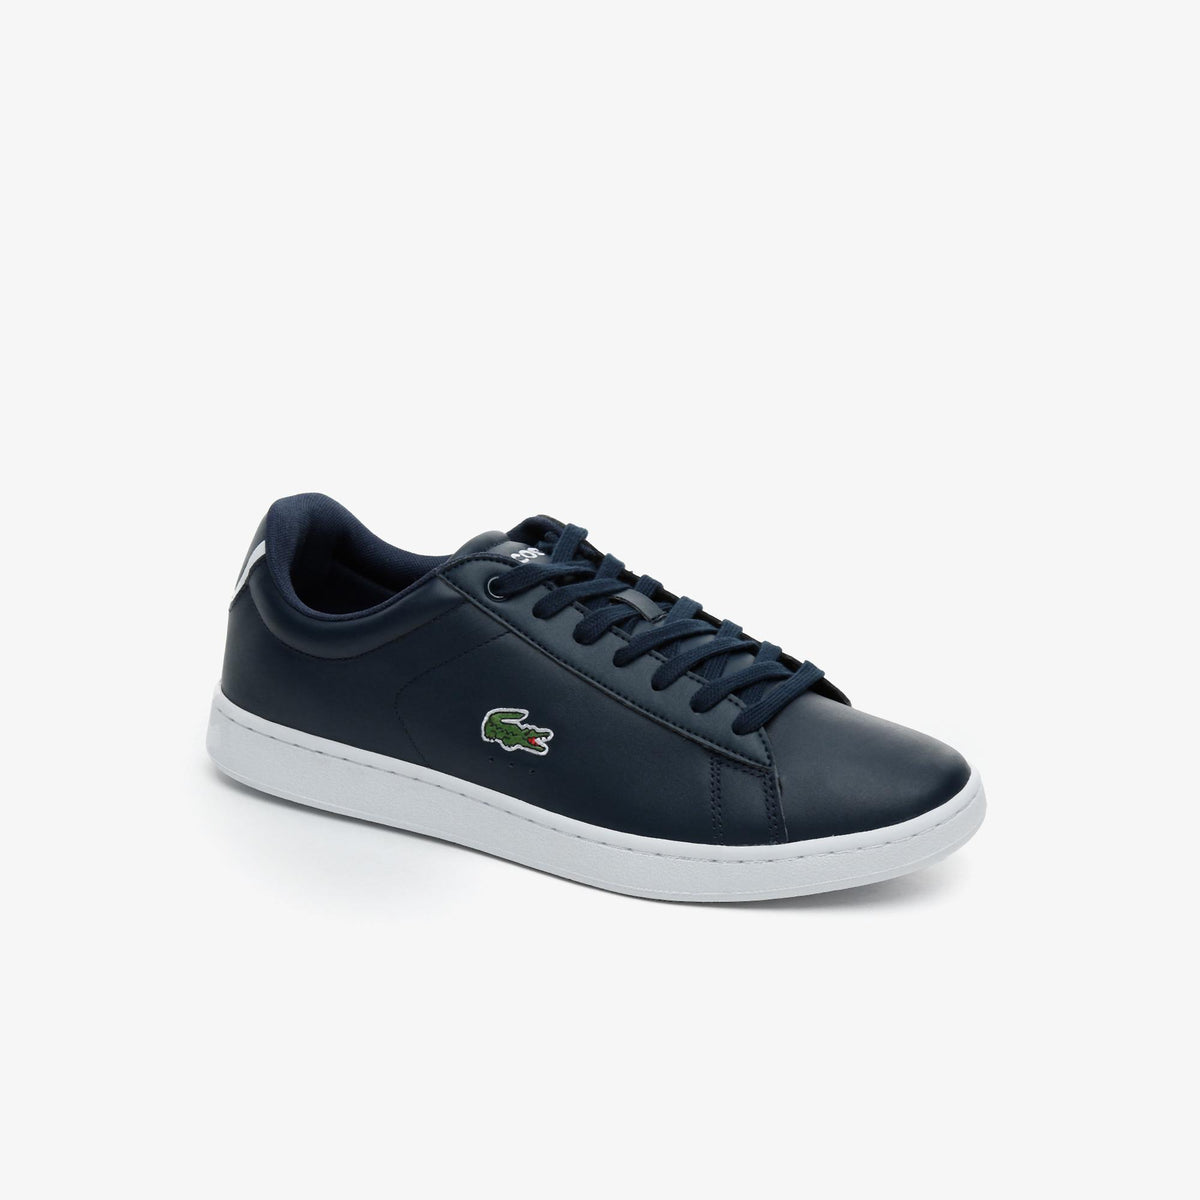 Carnaby Evo BL 1 Men's Leather Sneakers Navy